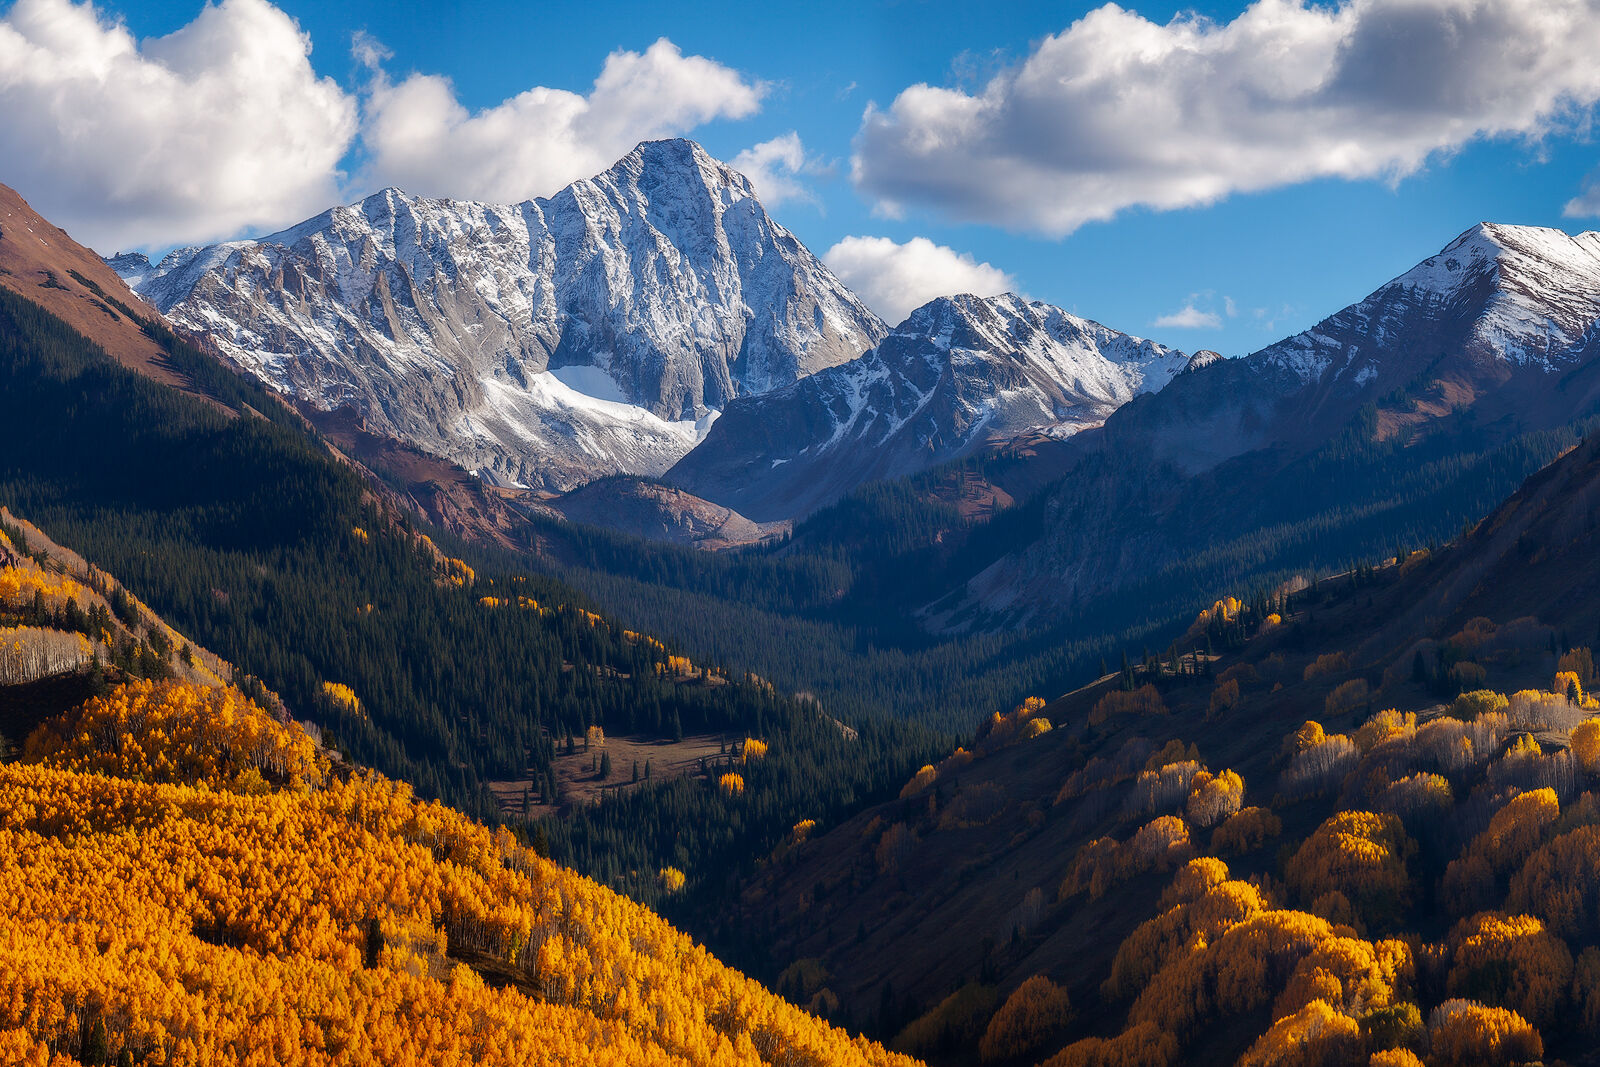 A mountain stands tall in the background with a dusting of snow and fall color aspen trees shine in the sun.